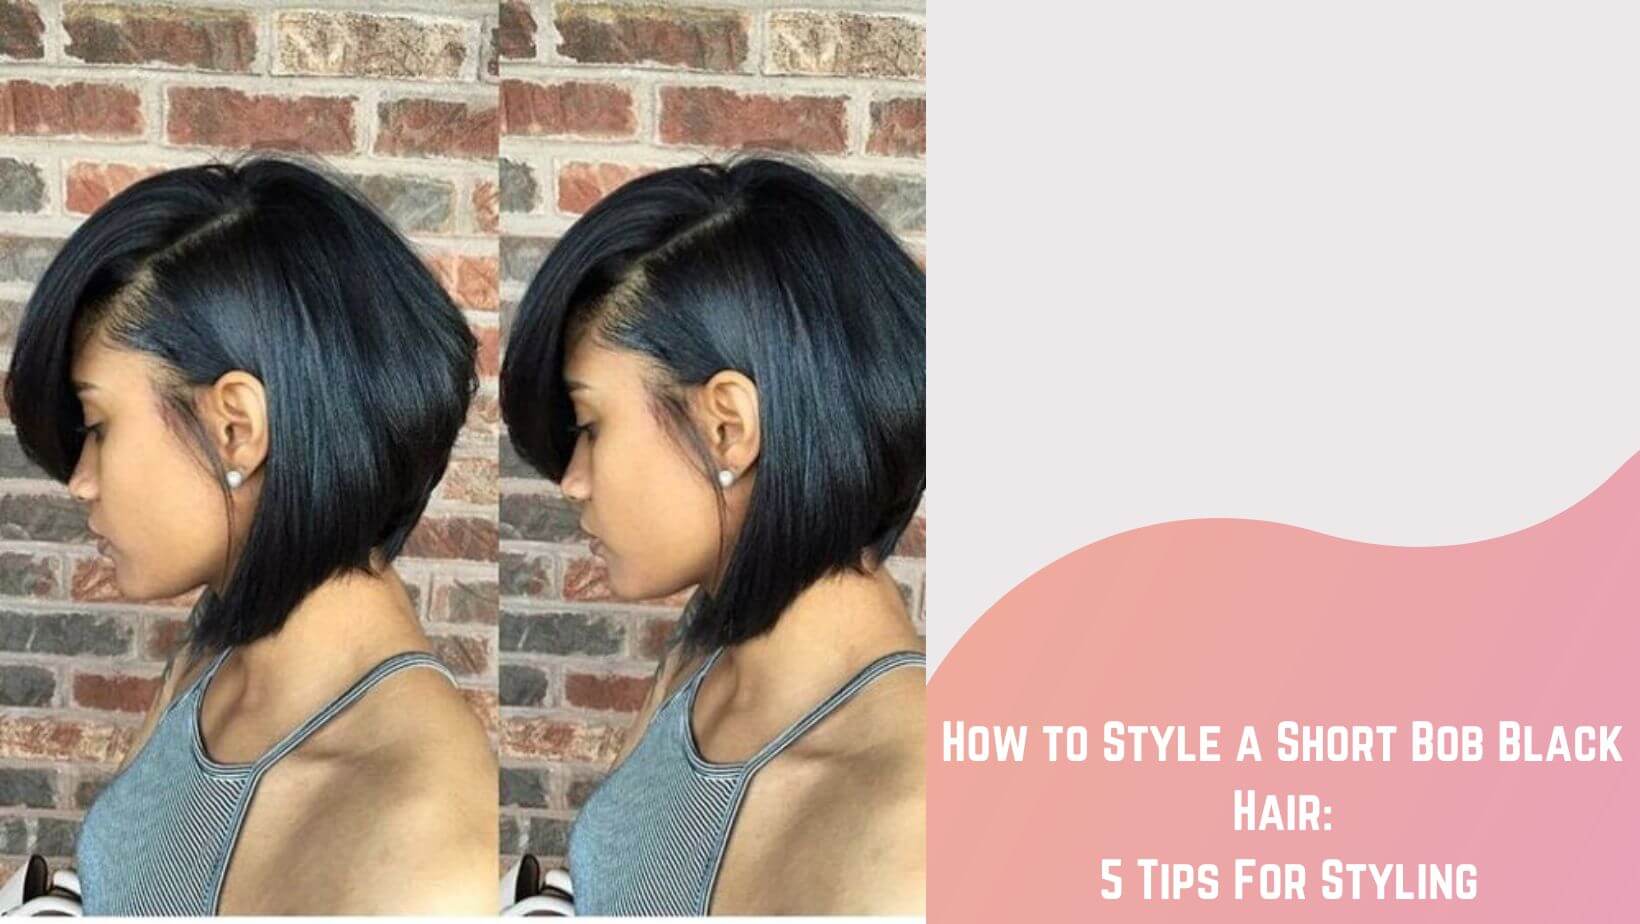 How to Style a Short Bob Black Hair